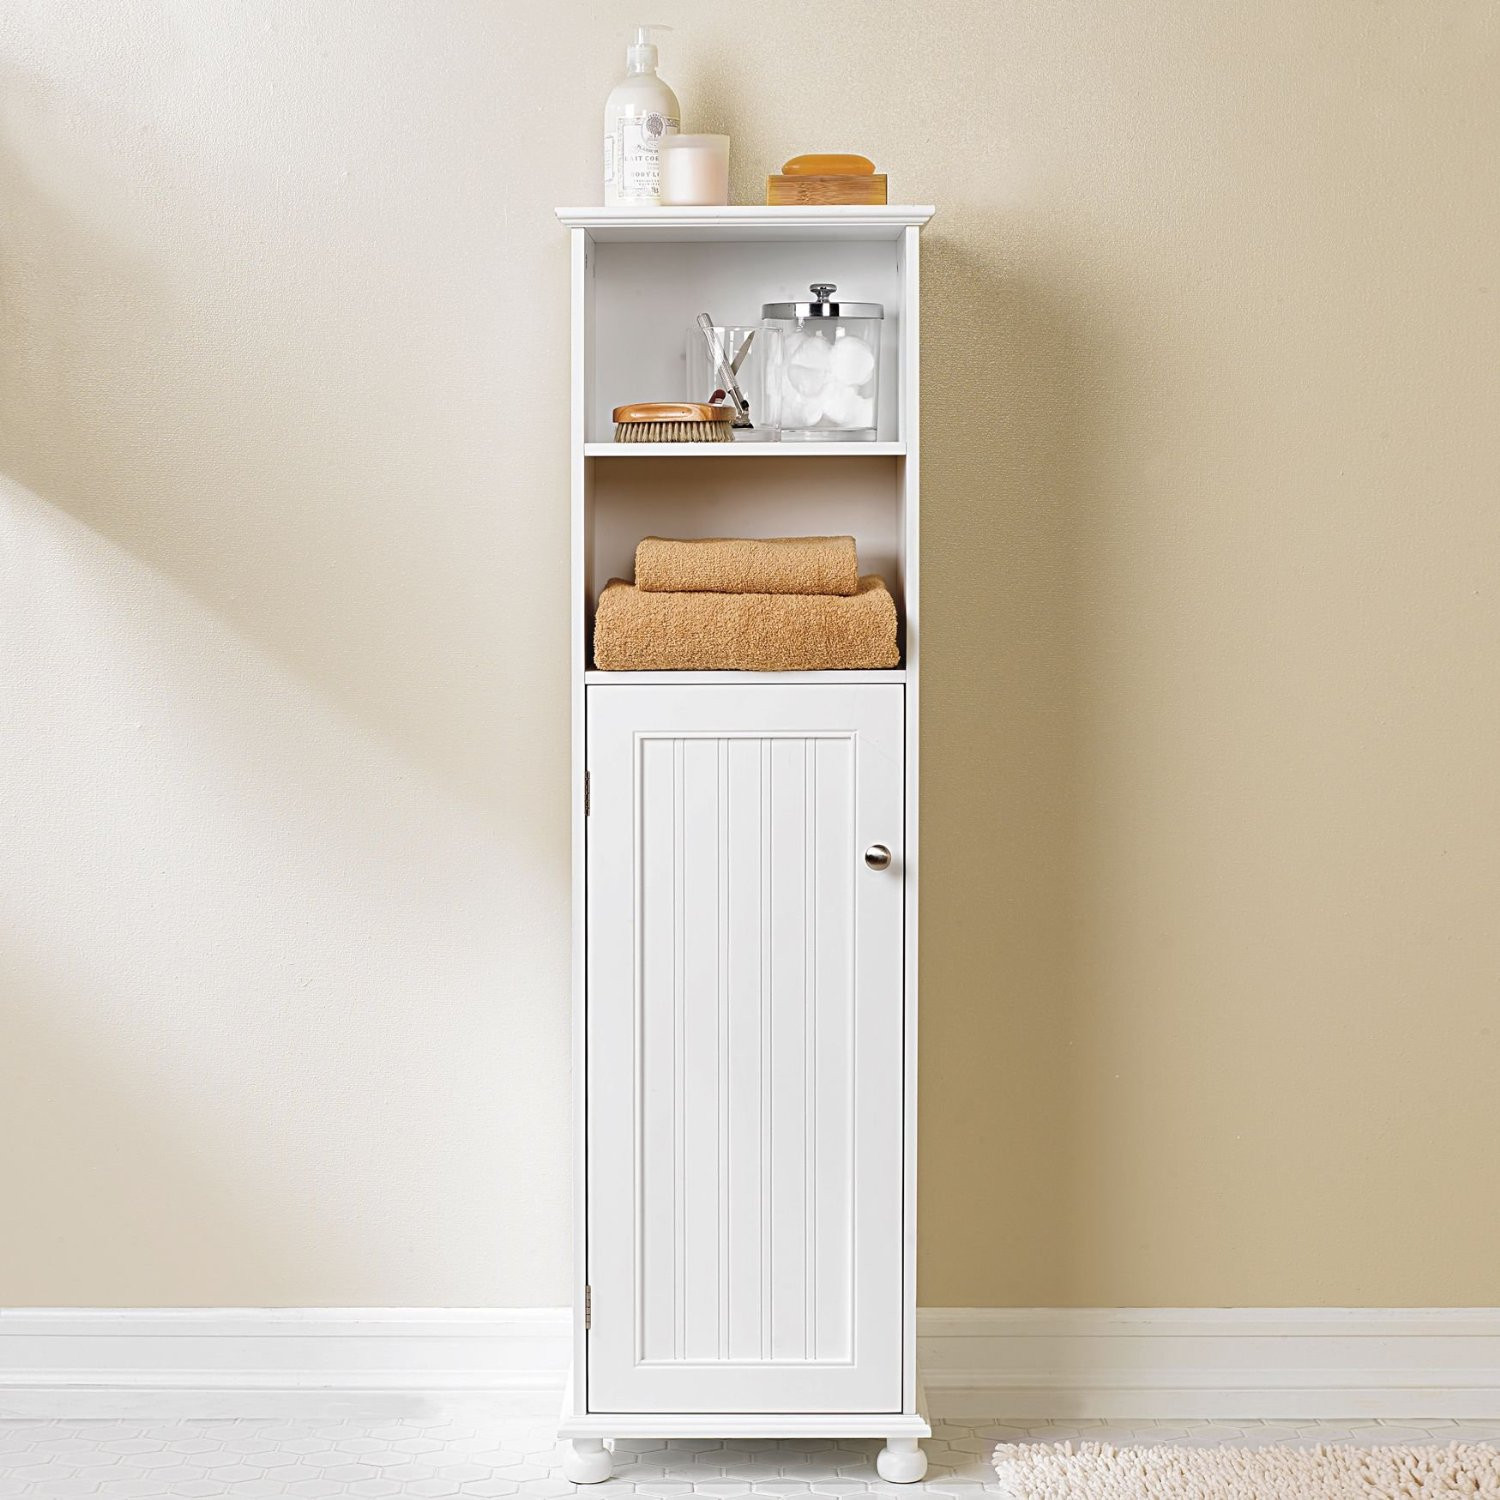 Storage Cabinets For Bathroom
 Add Character to Your Home Interiors with Bathroom Storage